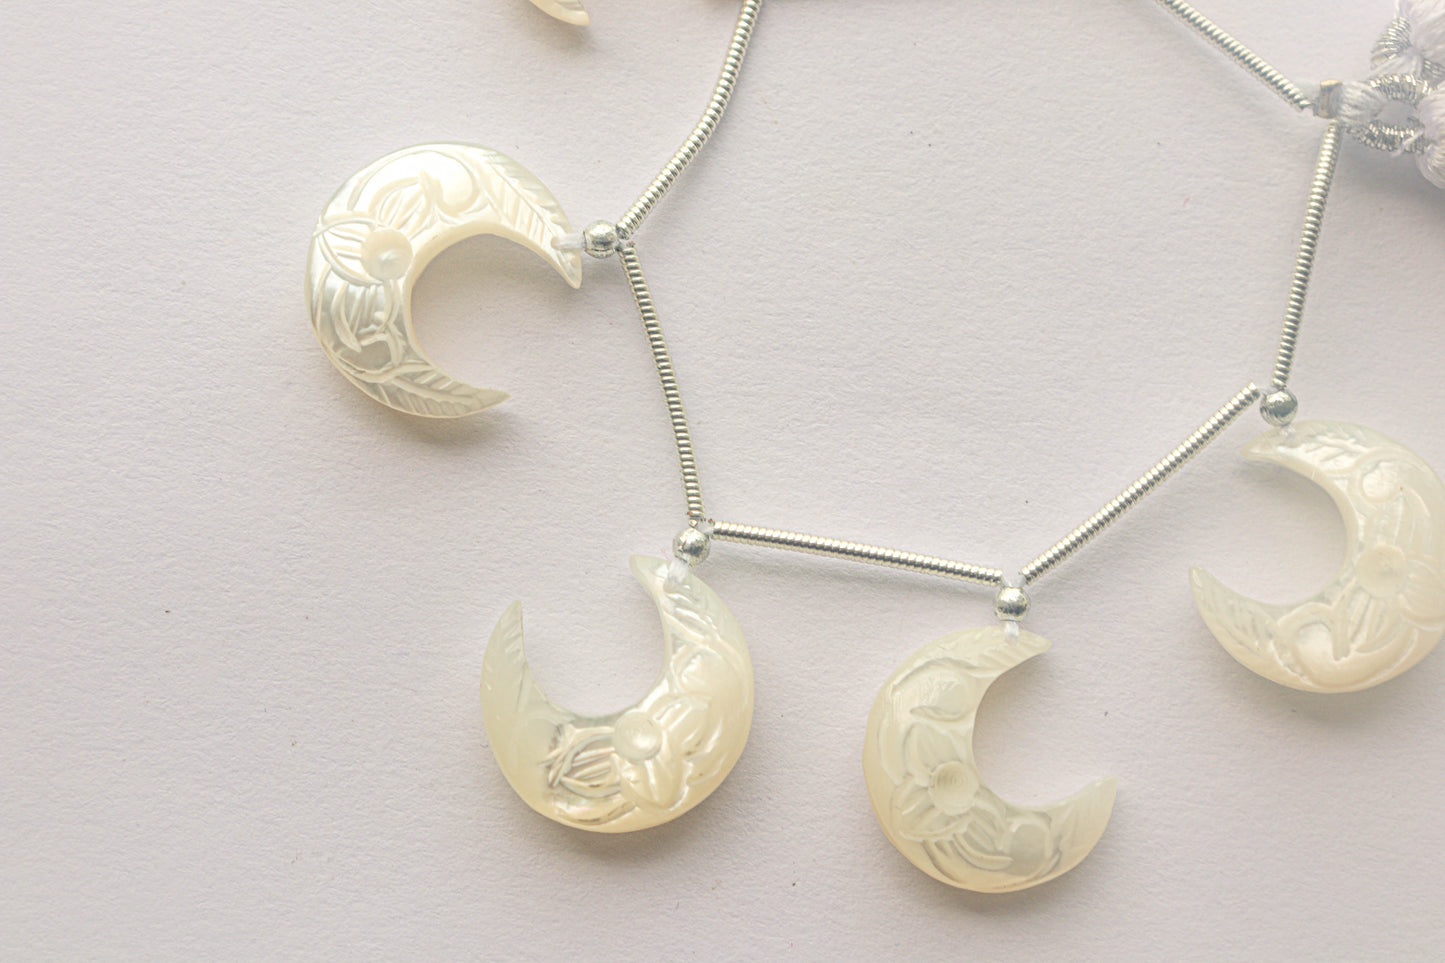 10 Pieces Mother of Pearl Carved Moon Shape Beadsforyourjewelry